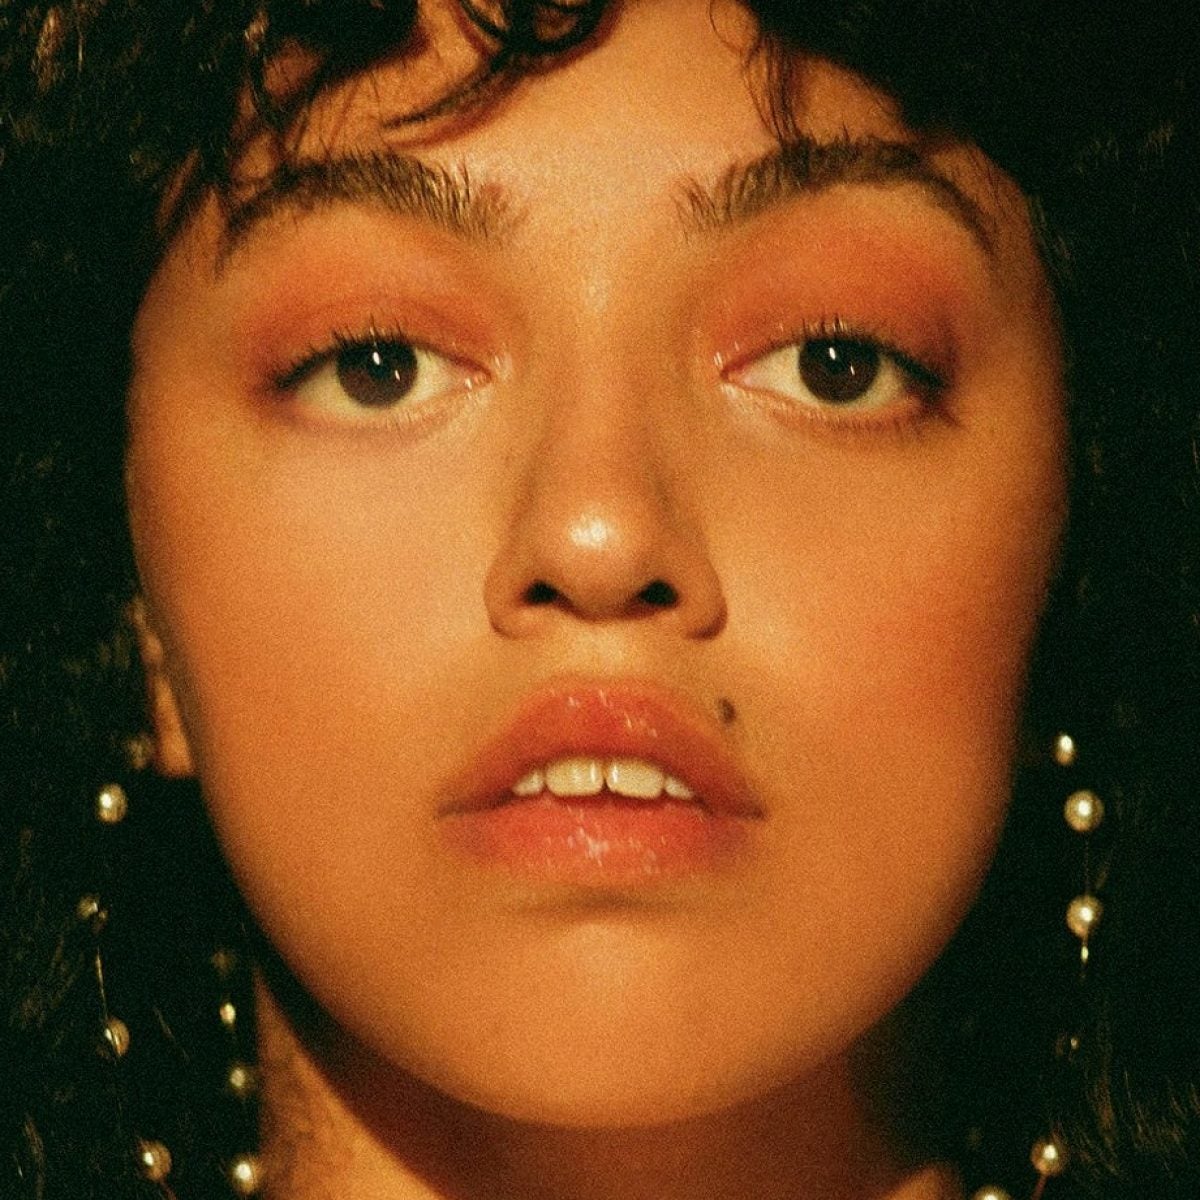 Love Lockdown: Mahalia on Being Quarantined, Releasing 'Isolation Tapes' and Rediscovering Herself